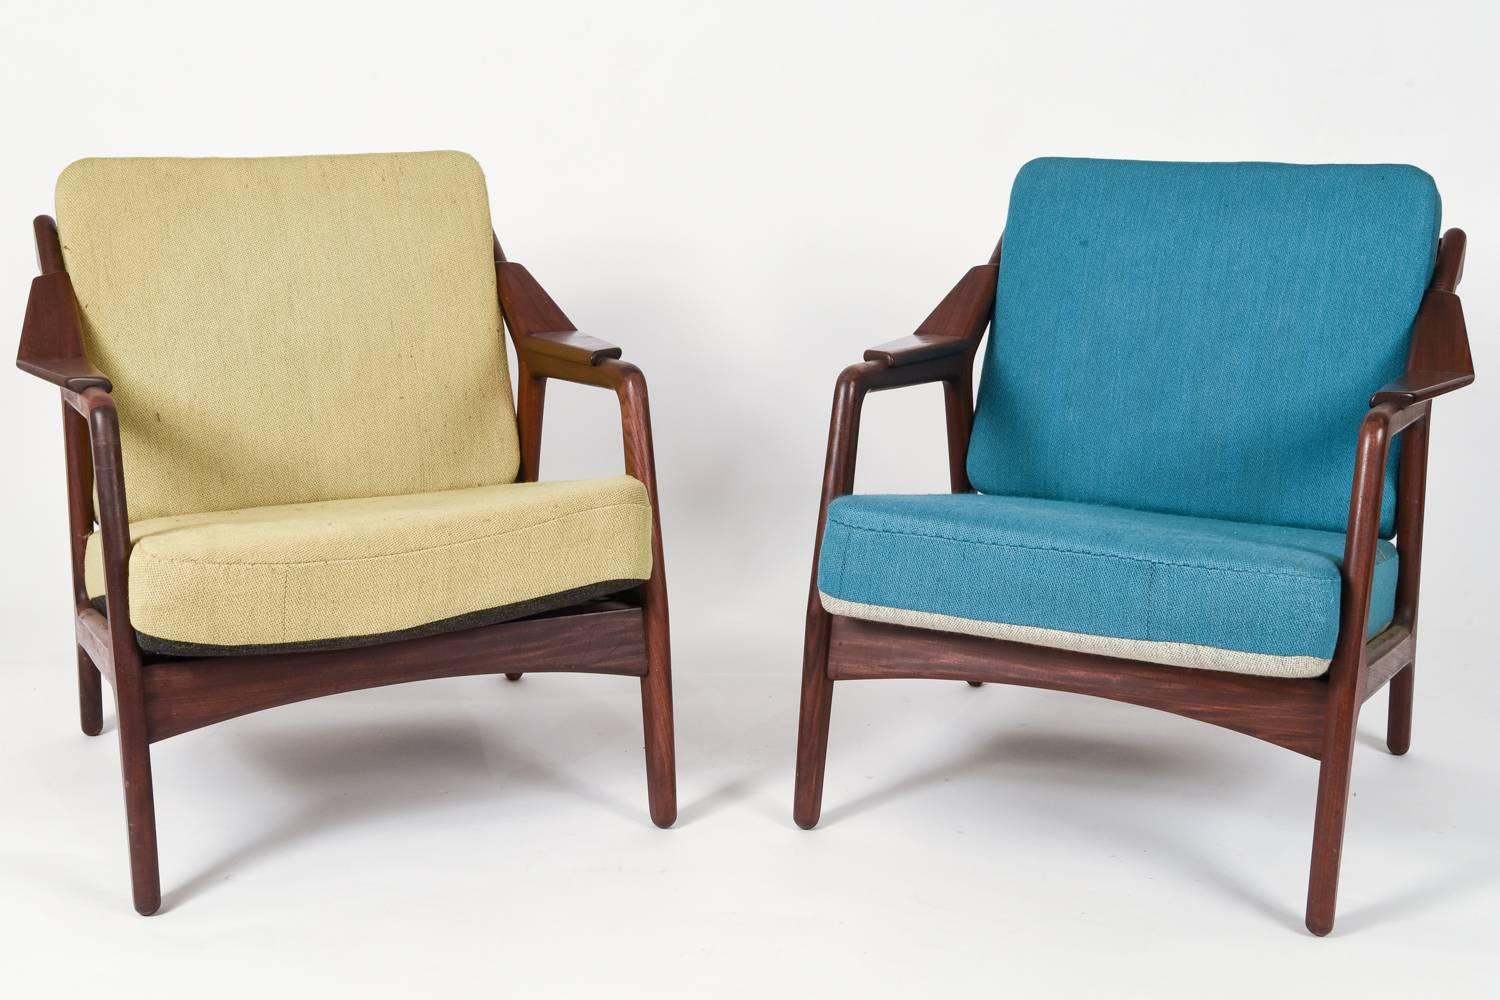 A great pair of Danish Mid-Century easy chairs designed by H. Brockmann Petersen for Poul M. Jessen. Very interesting design and wonderful teak wood, circa 1950s.